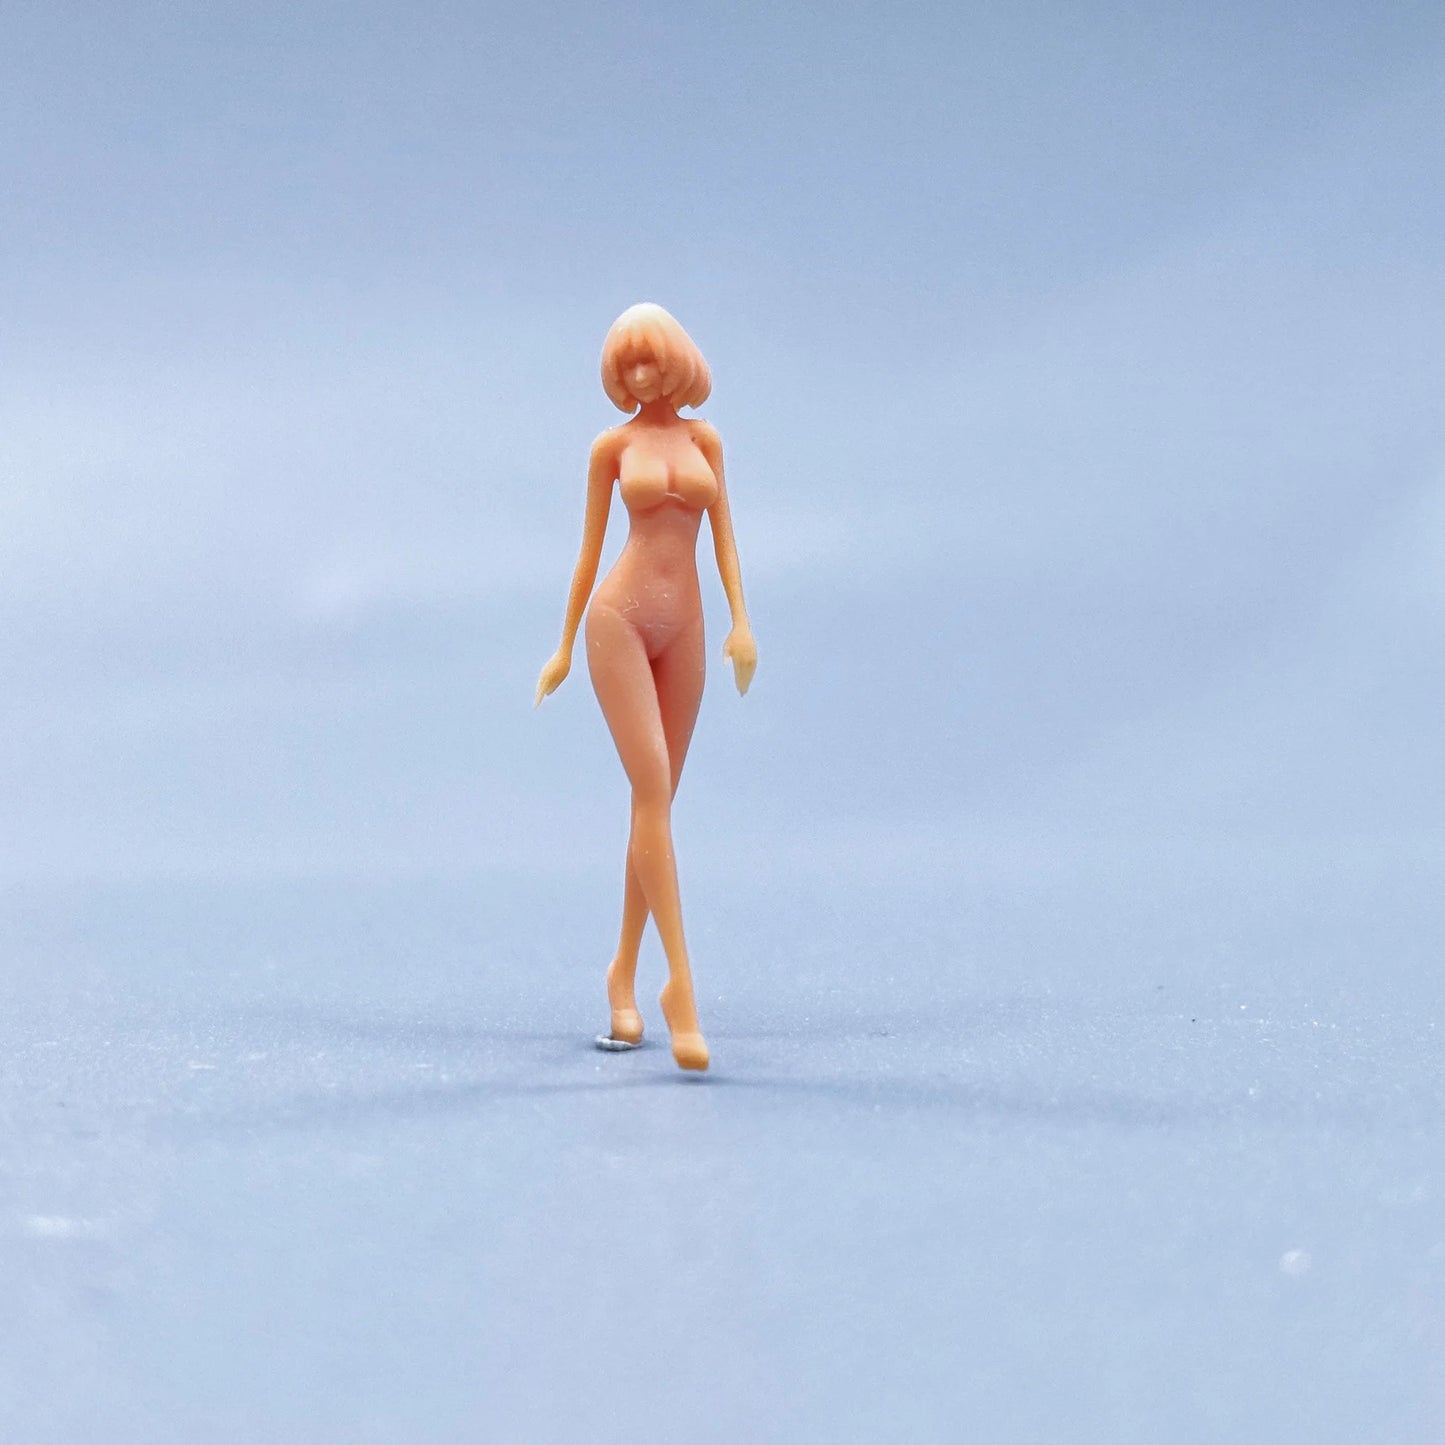 1/64 1/43 Figurines Scale Model Resin Sitting Bikini Short Hair Girl Uncolored Miniatures Diorama Hand-painted S745